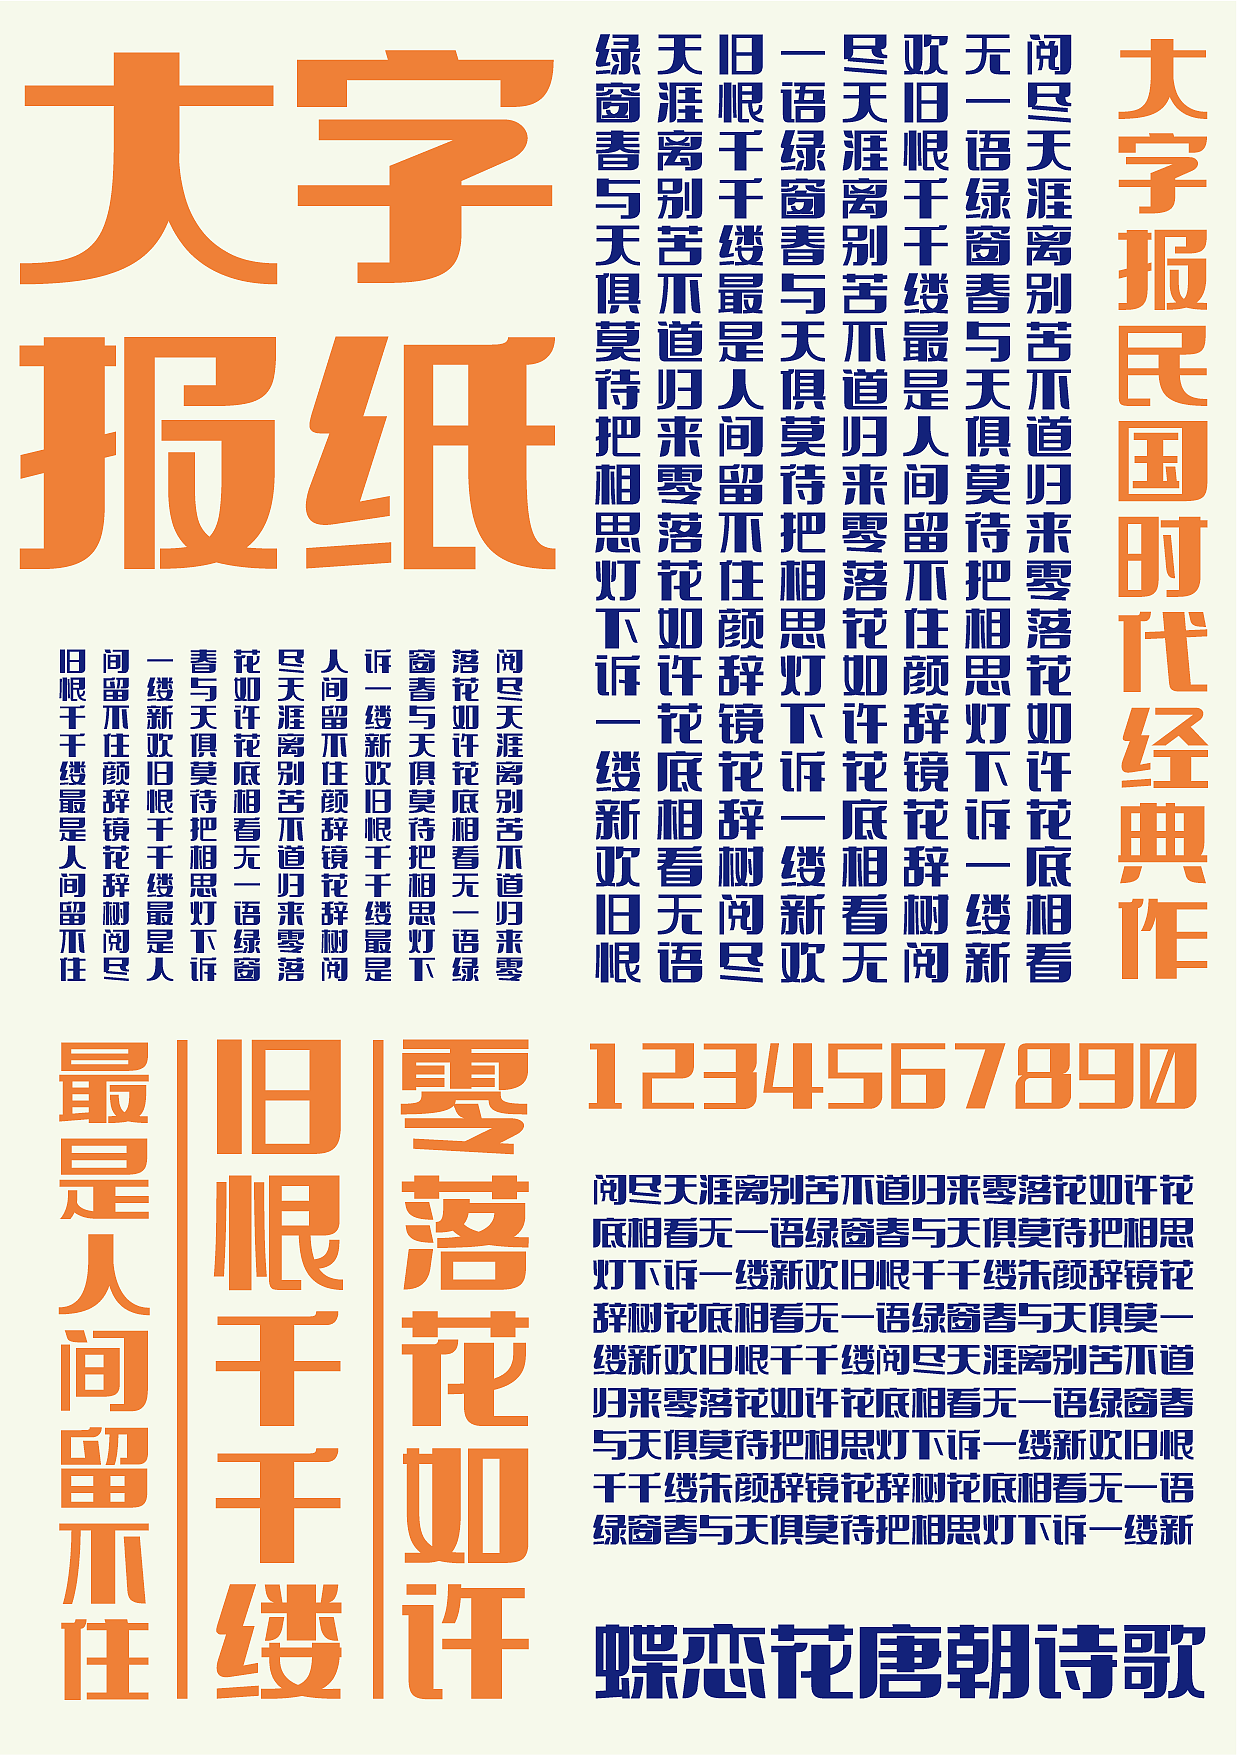 Braille posters are coming, the new era of the Republic of China ~